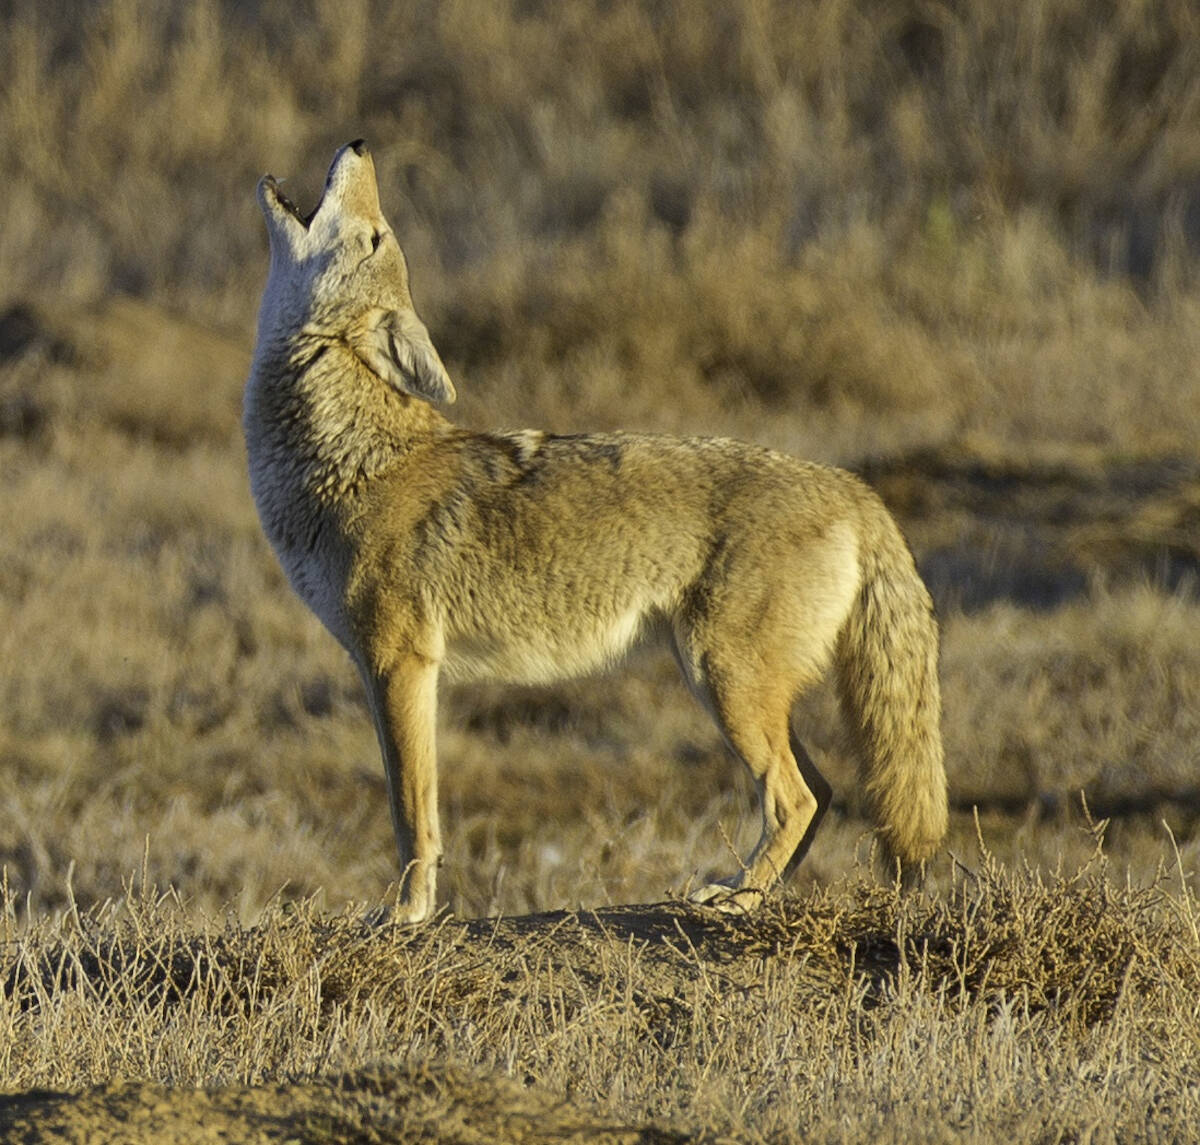 B.C. Conservation Officer Service (COS) is investigating two reported attacks by coyotes in two weeks in ALdergrove, the most recent on Friday, July 15. (Photo: USFWS (U.S. Fish and Wildlife Service) public domain)